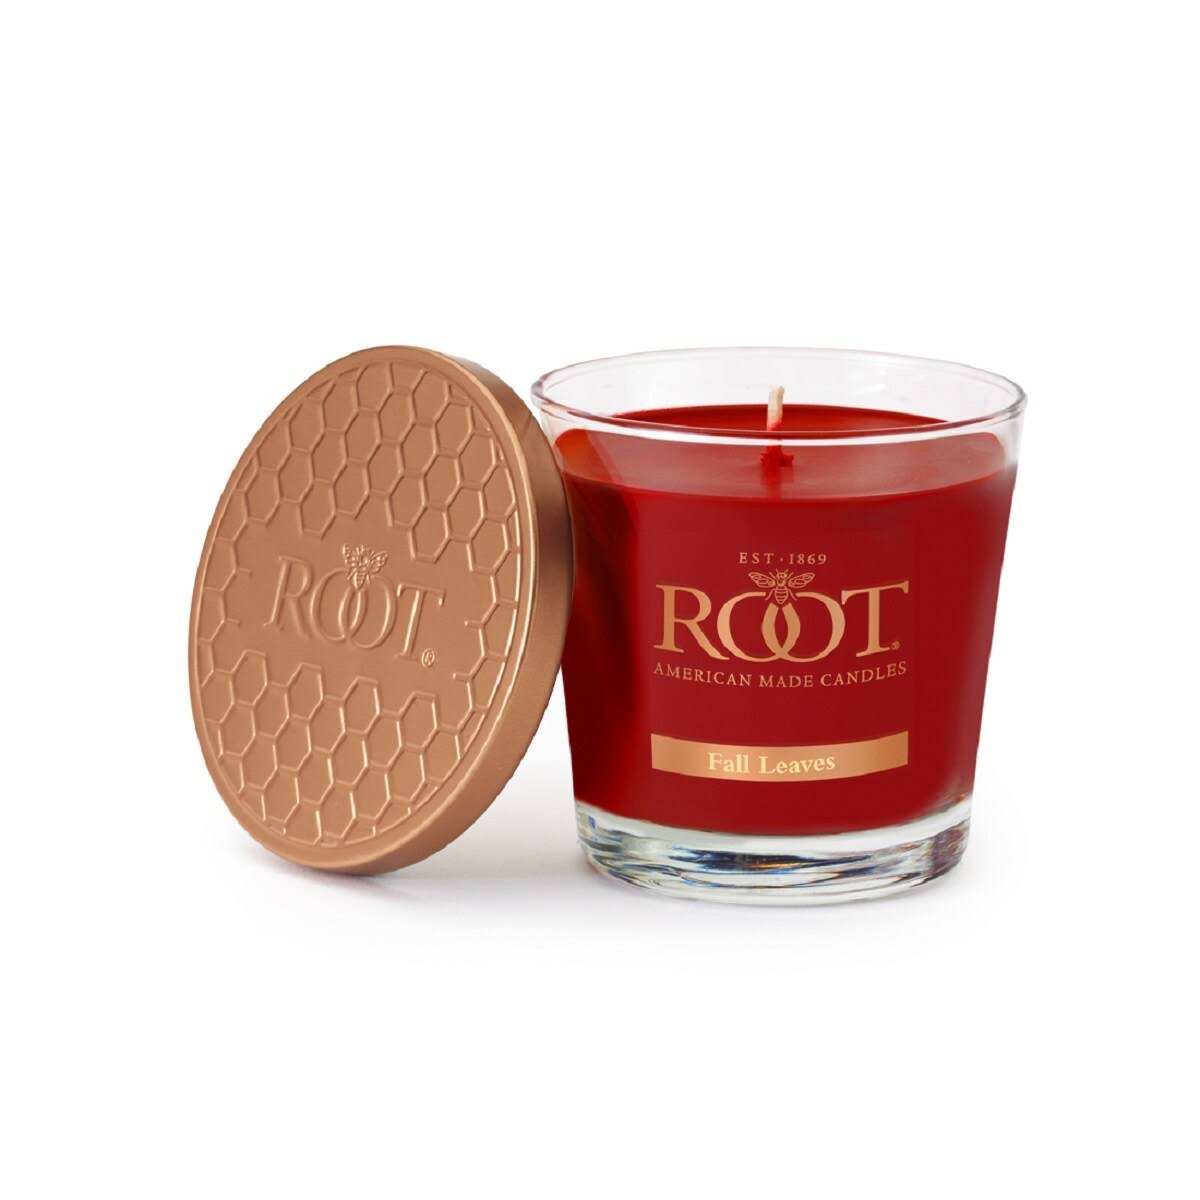 Root Candle, Fall Leaves - 1 candle, 6.3 oz